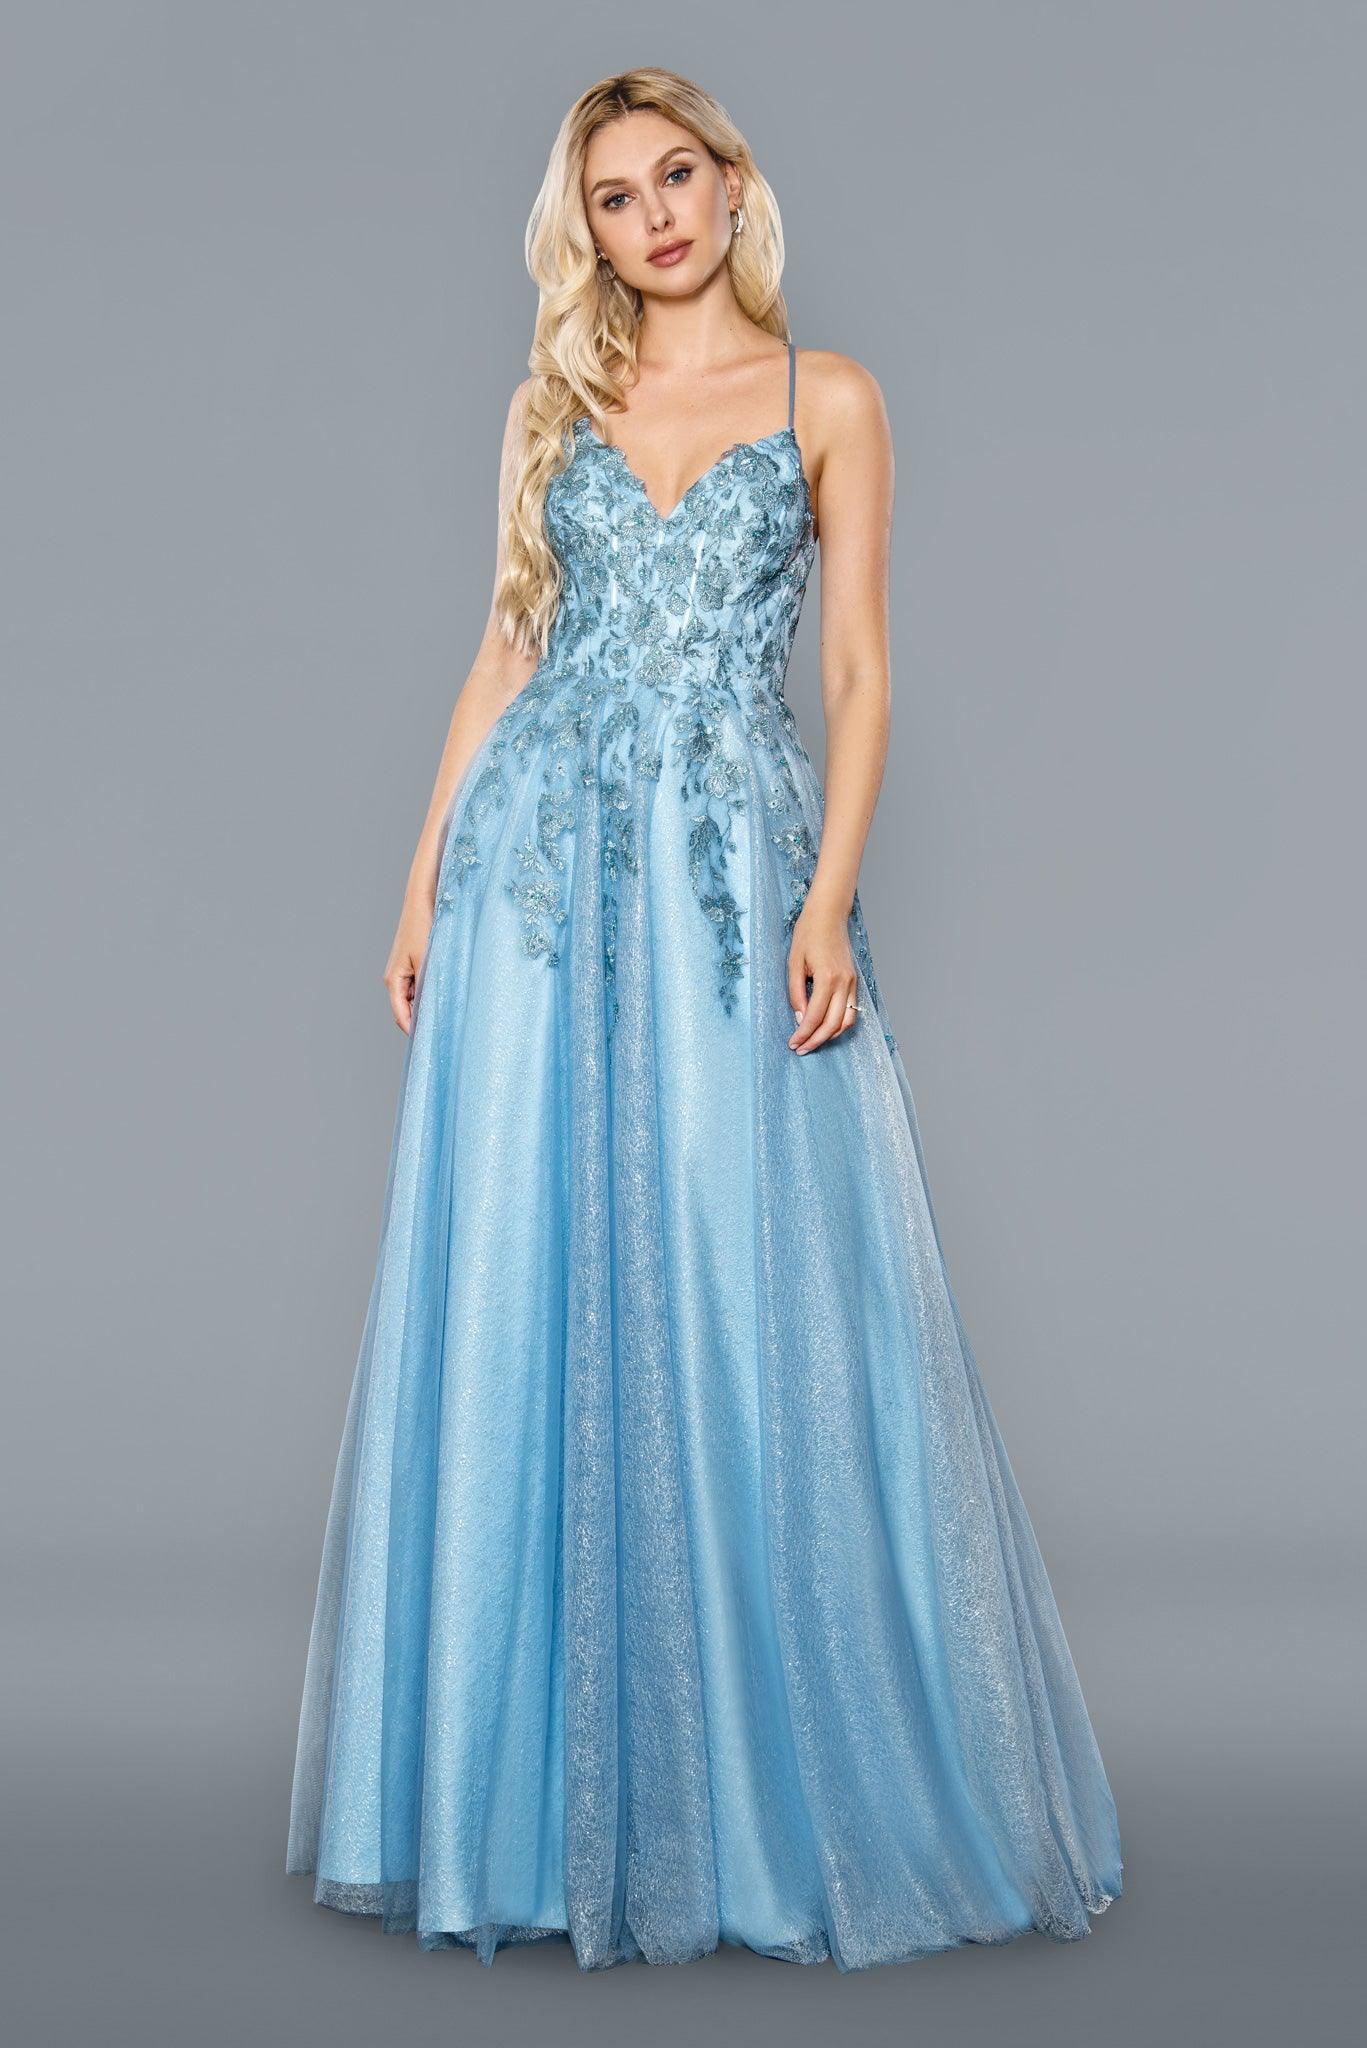 Long Spaghetti Straps Evening Gown Sky Blue